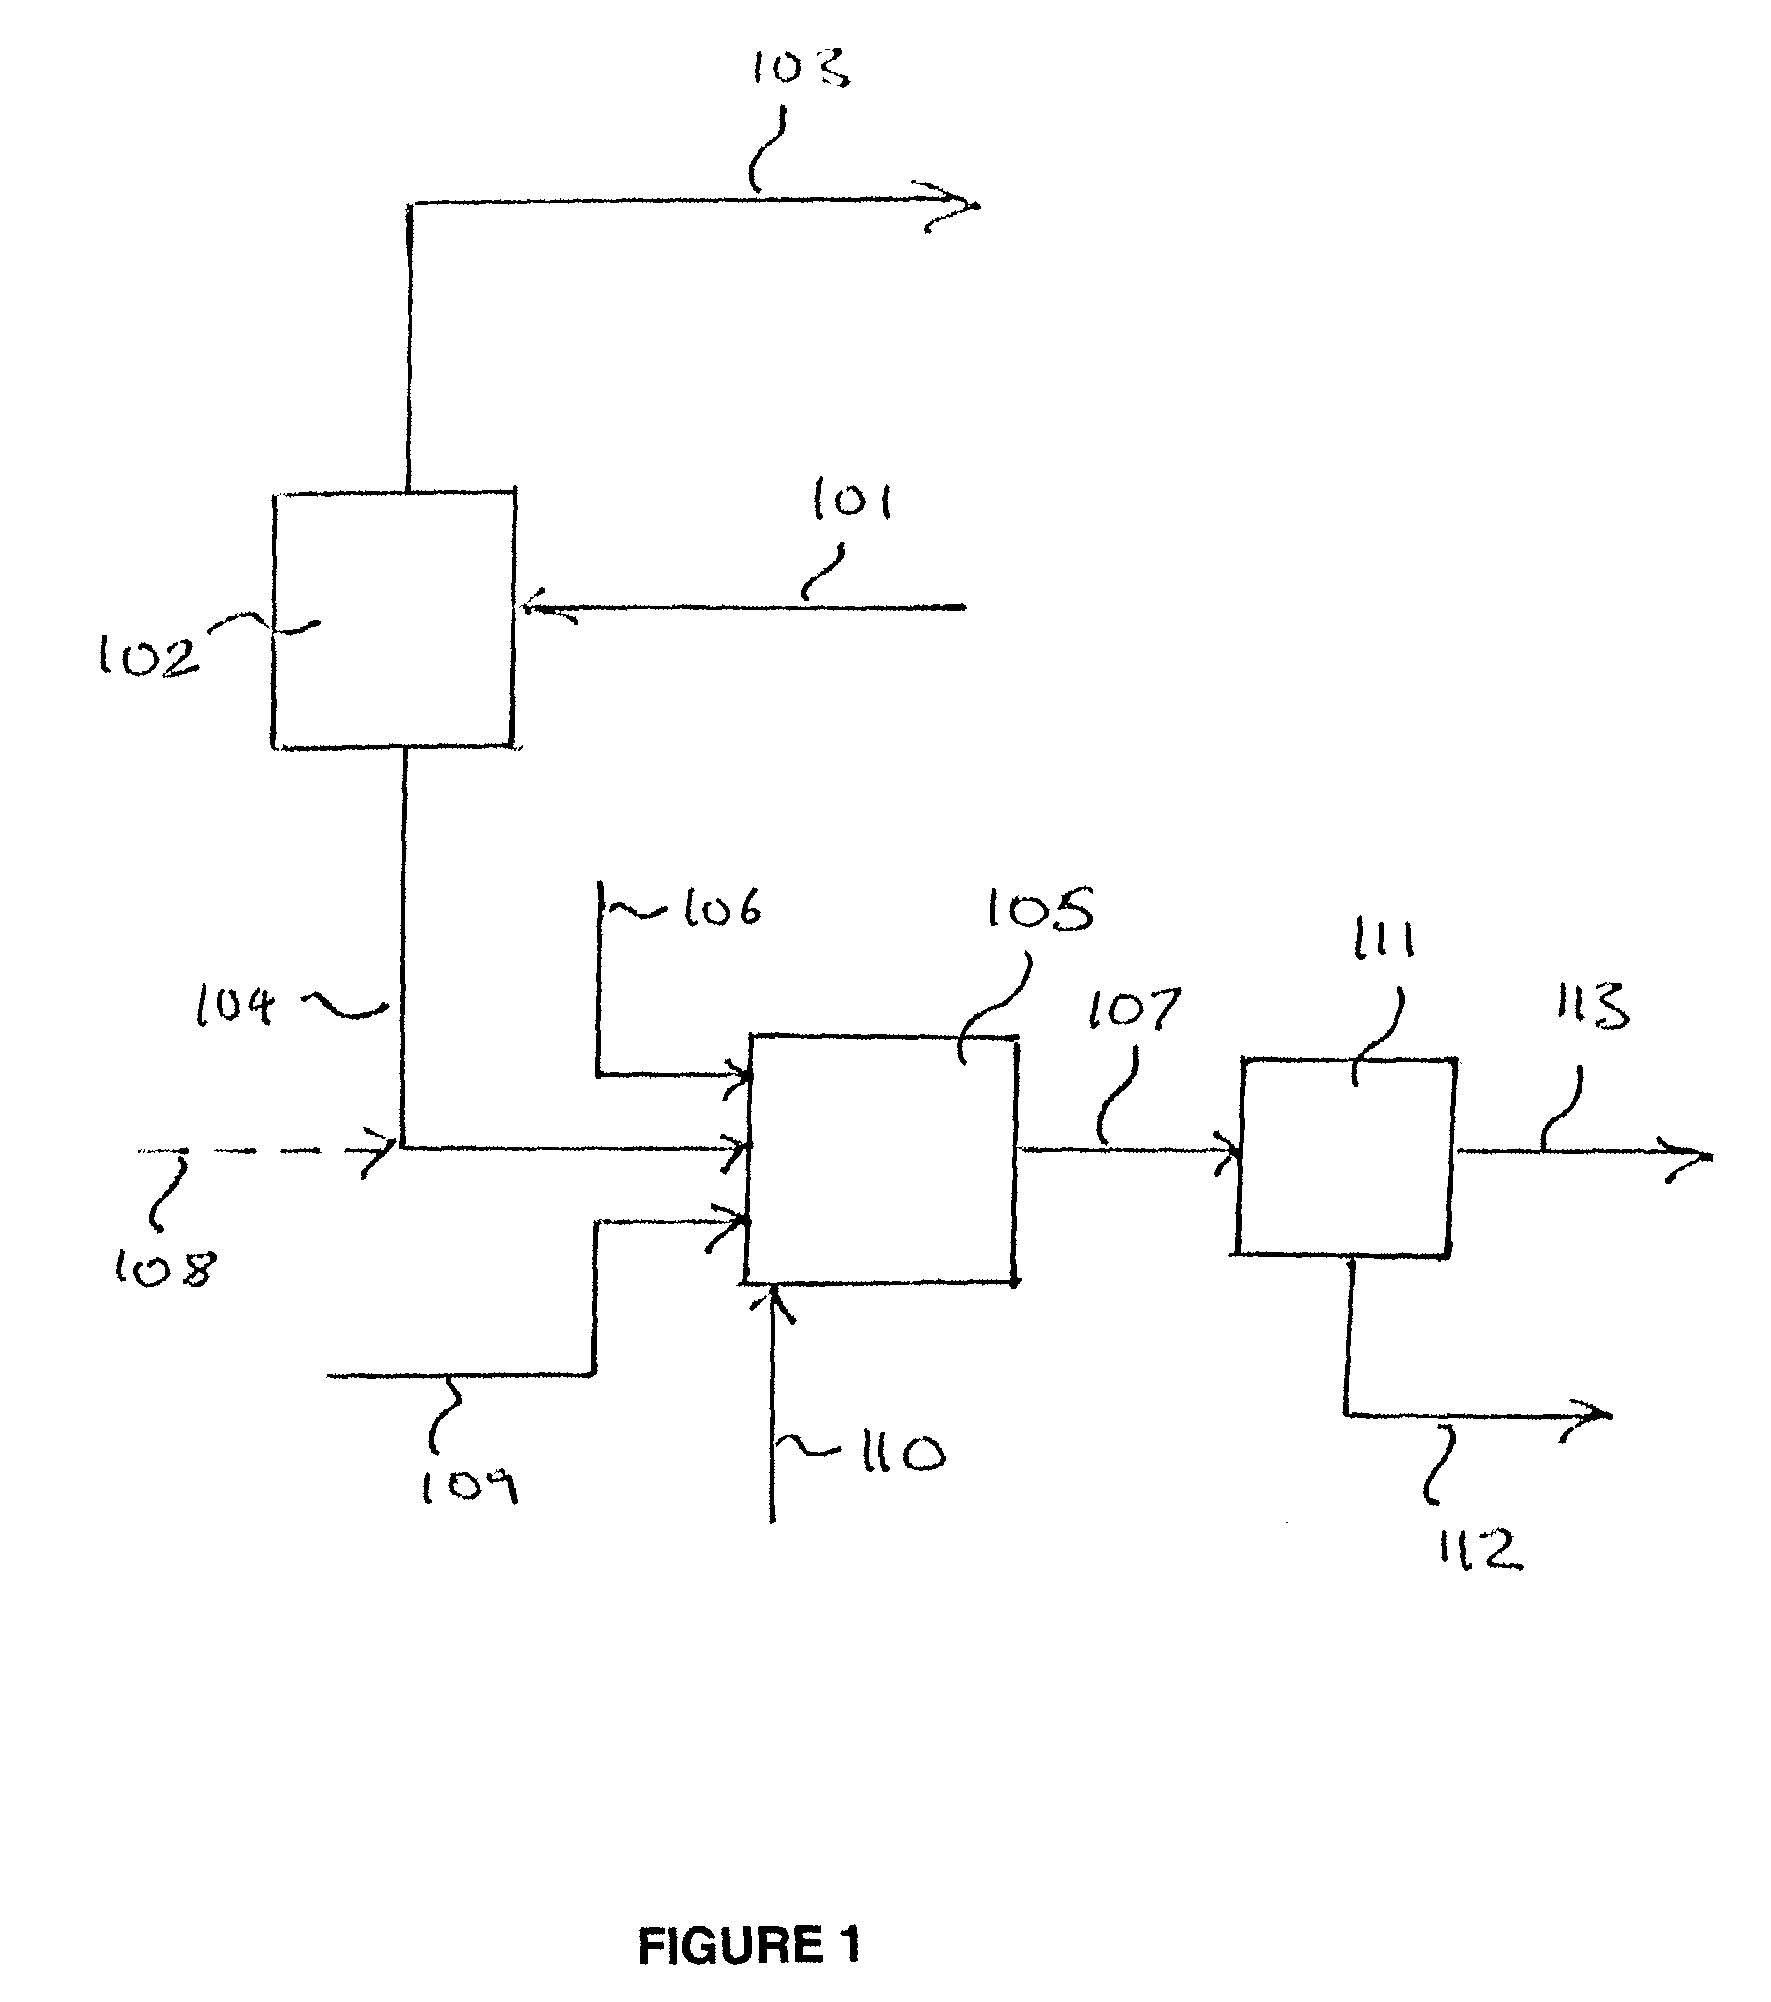 Method of treating a gaseous mixture comprising hydrogen, carbon dioxide and hydrogen sulphide